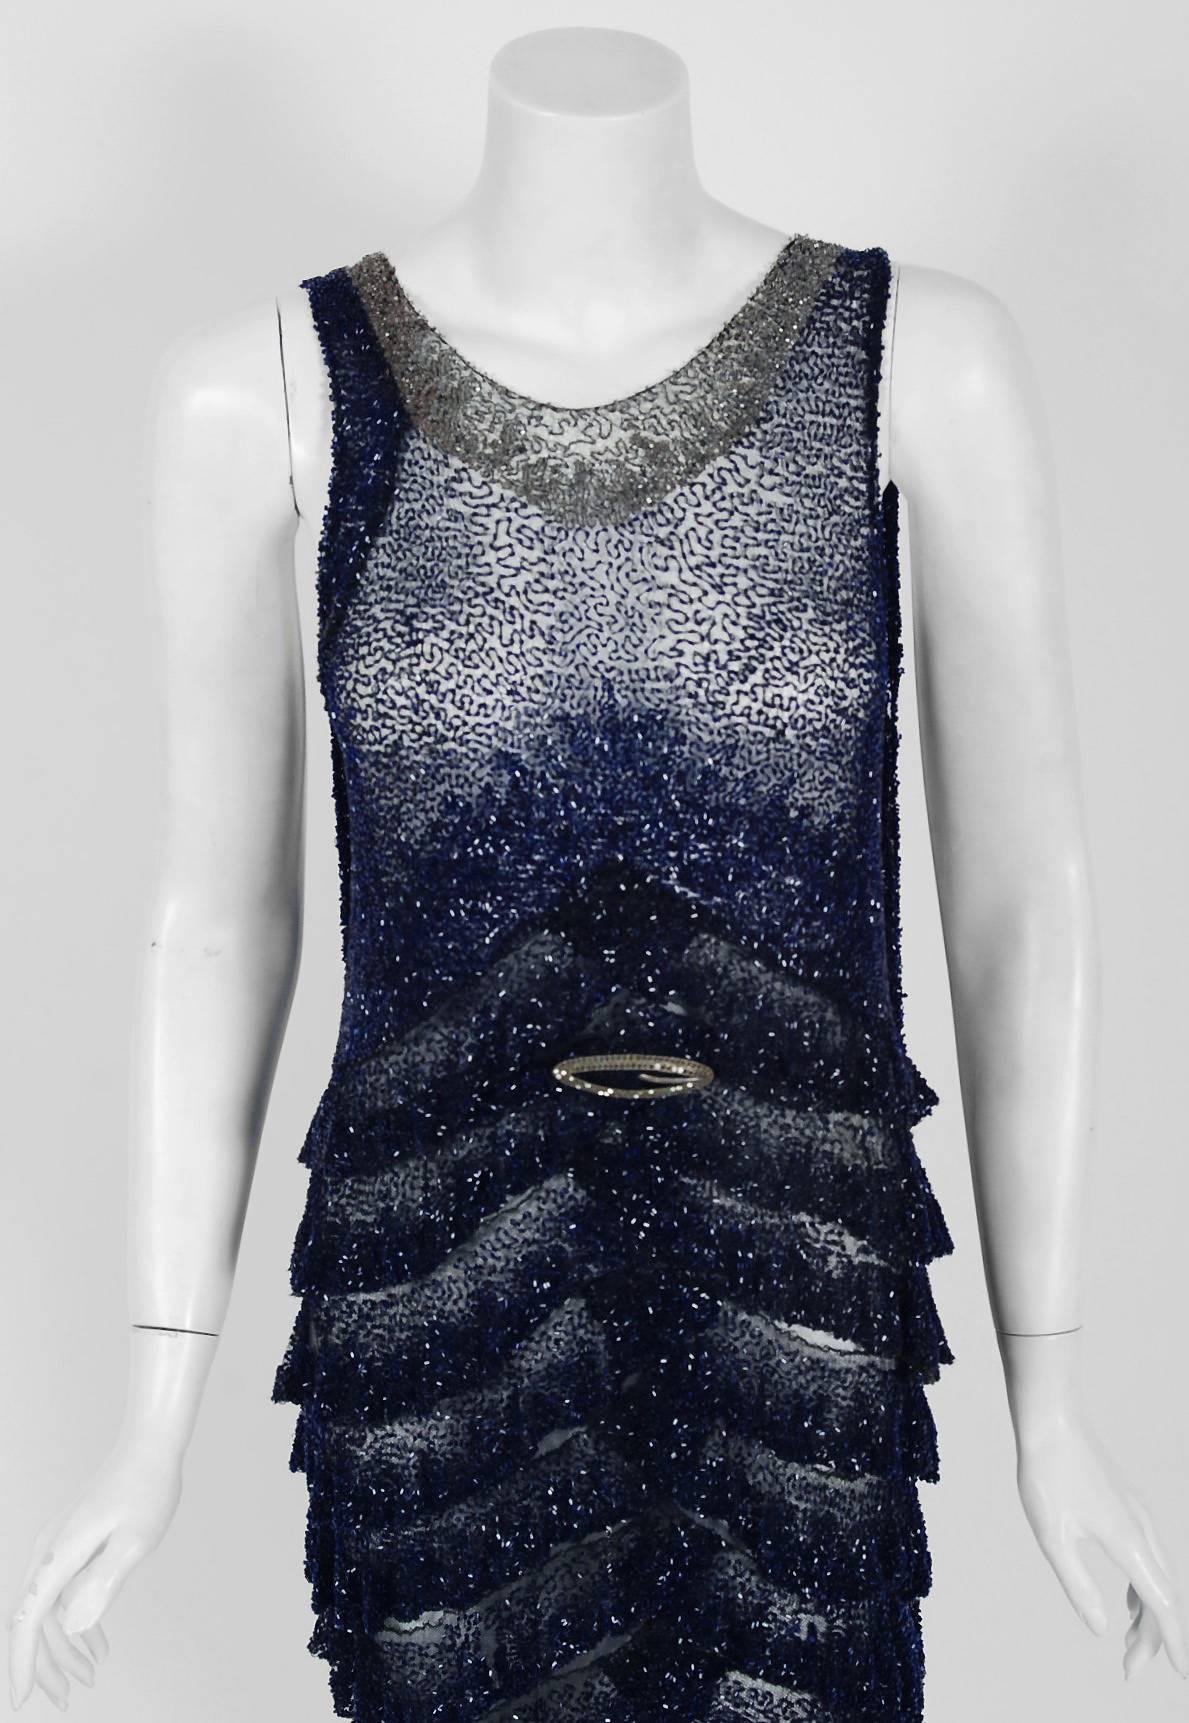 Undiminished by time, this 1920's French sapphire-blue and black flapper dance dress still casts its seductive spell. This exceptional Art Deco beauty is fashioned from sheer illusion cotton-net with sparkling glass beadwork throughout. The